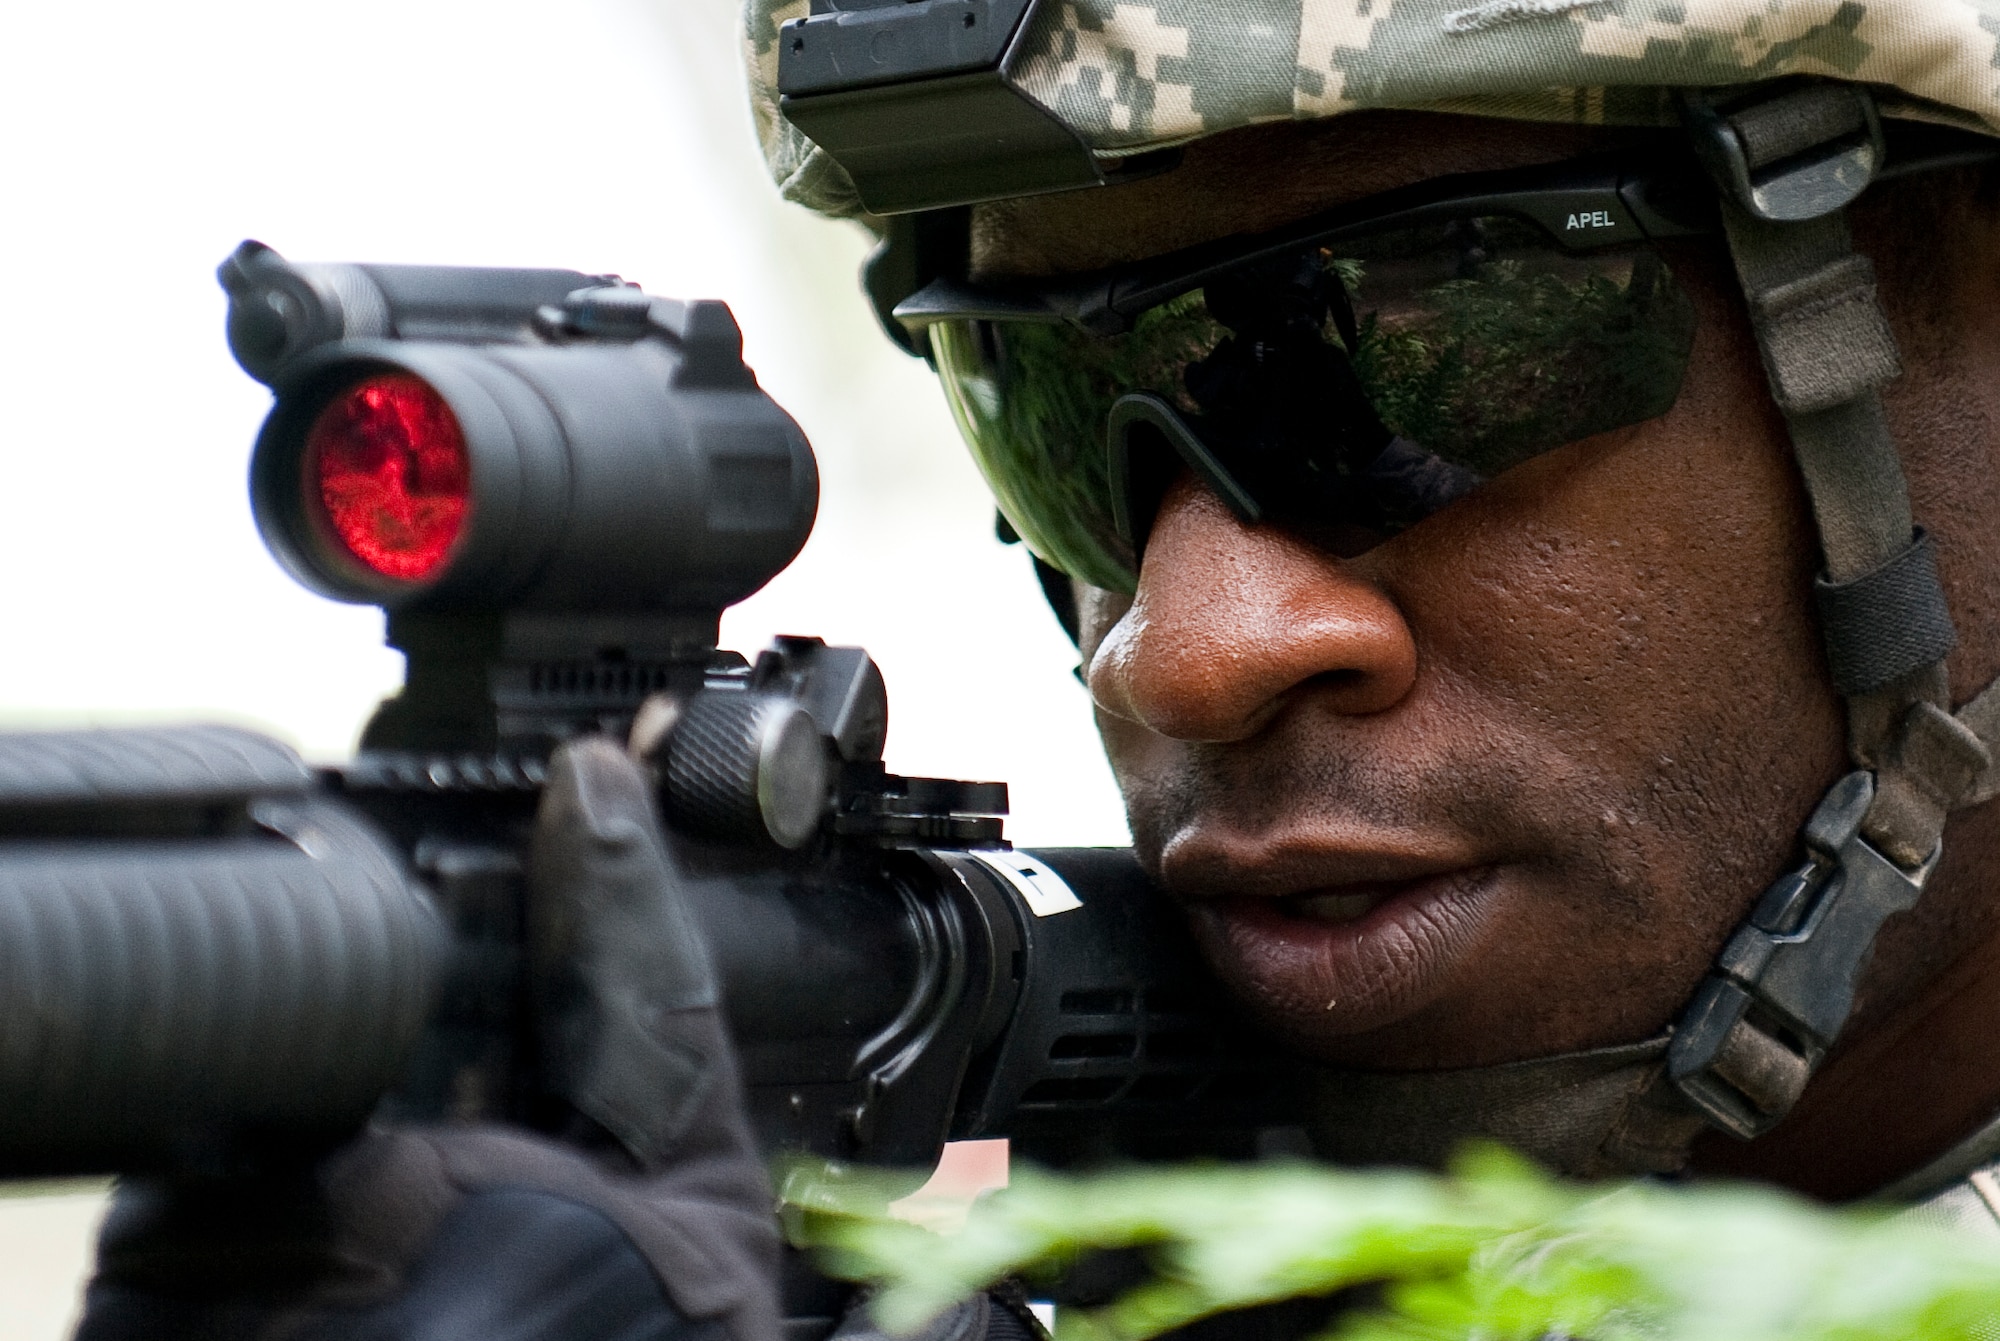 Staff Sgt. Austin Esotu, a member of the 122nd Security Forces Squadron, 122nd Fighter Wing, Fort Wayne, Ind., keeps an eye out for enemy combatants during a reconnaissance exercise, July 28, 2015, at the Combat Readiness Training Center, Alpena, Mich. Airmen from the 122nd Fighter Wing were training at the CRTC as part of their annual training. (U.S. Air National Guard photo by Staff Sgt. William Hopper)